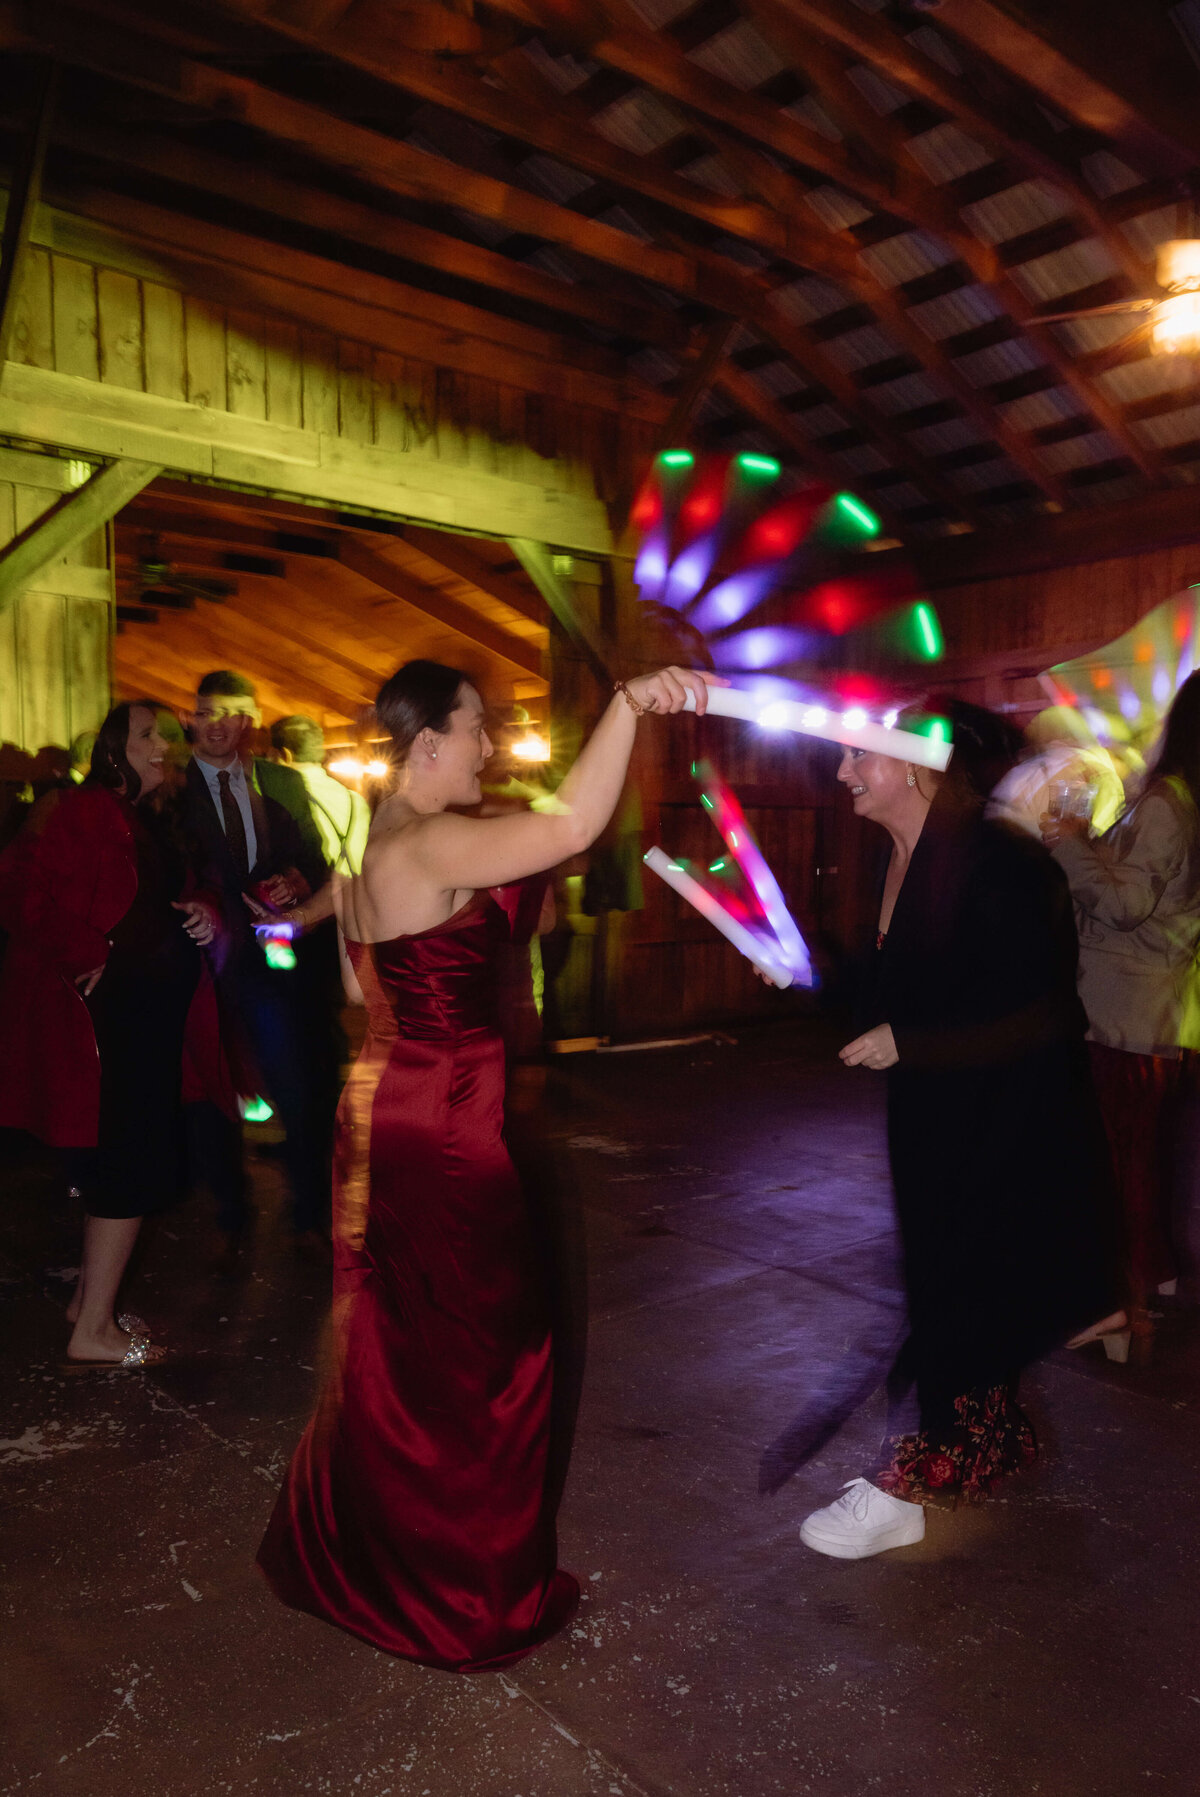 indoor wedding reception with bridesmaid in a red gown holding a light wand and dancing